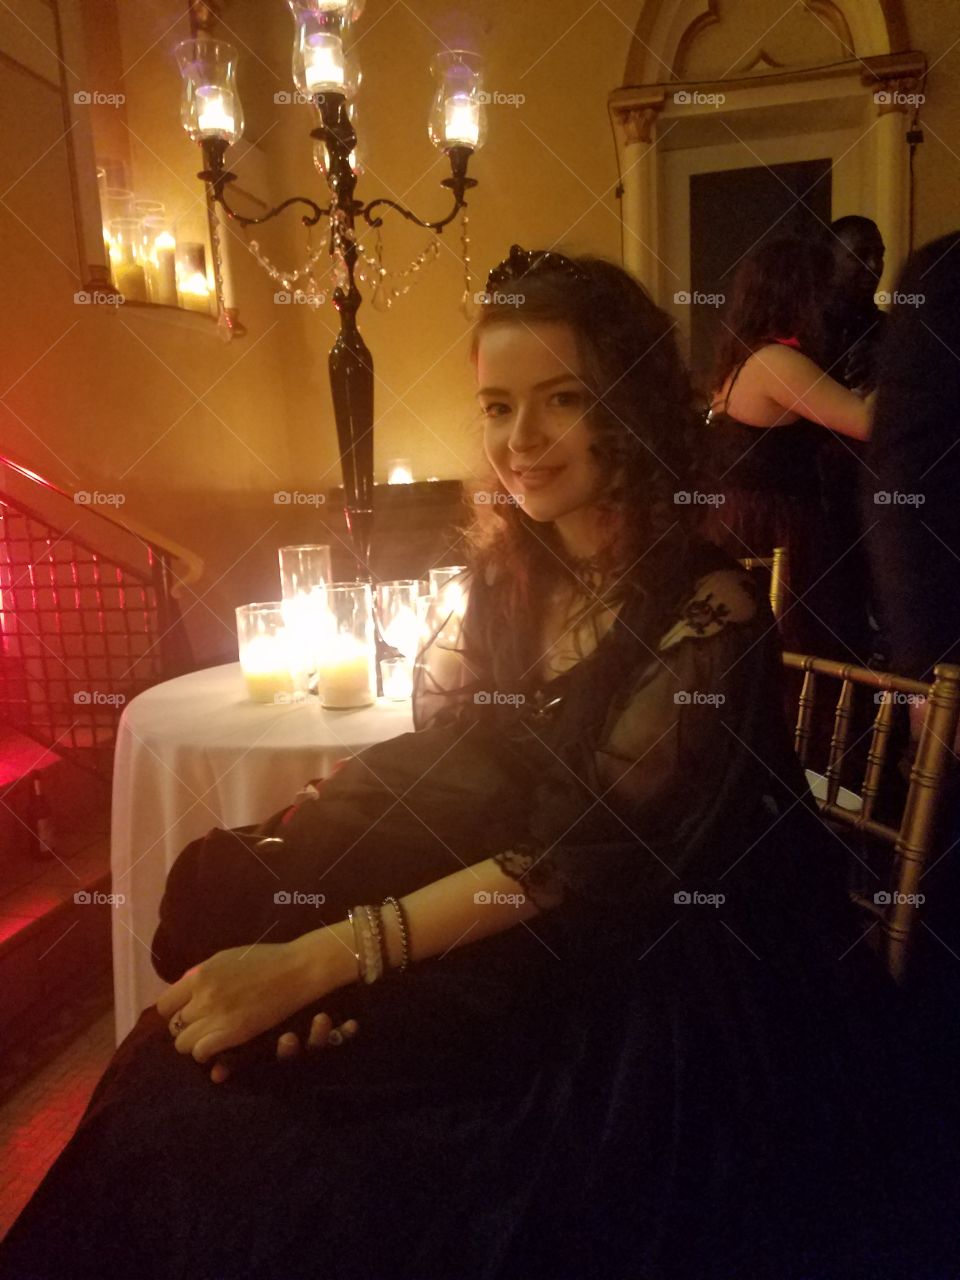 A most ethereal beauty at the Bloodlust Vampire Ball in New Orleans.